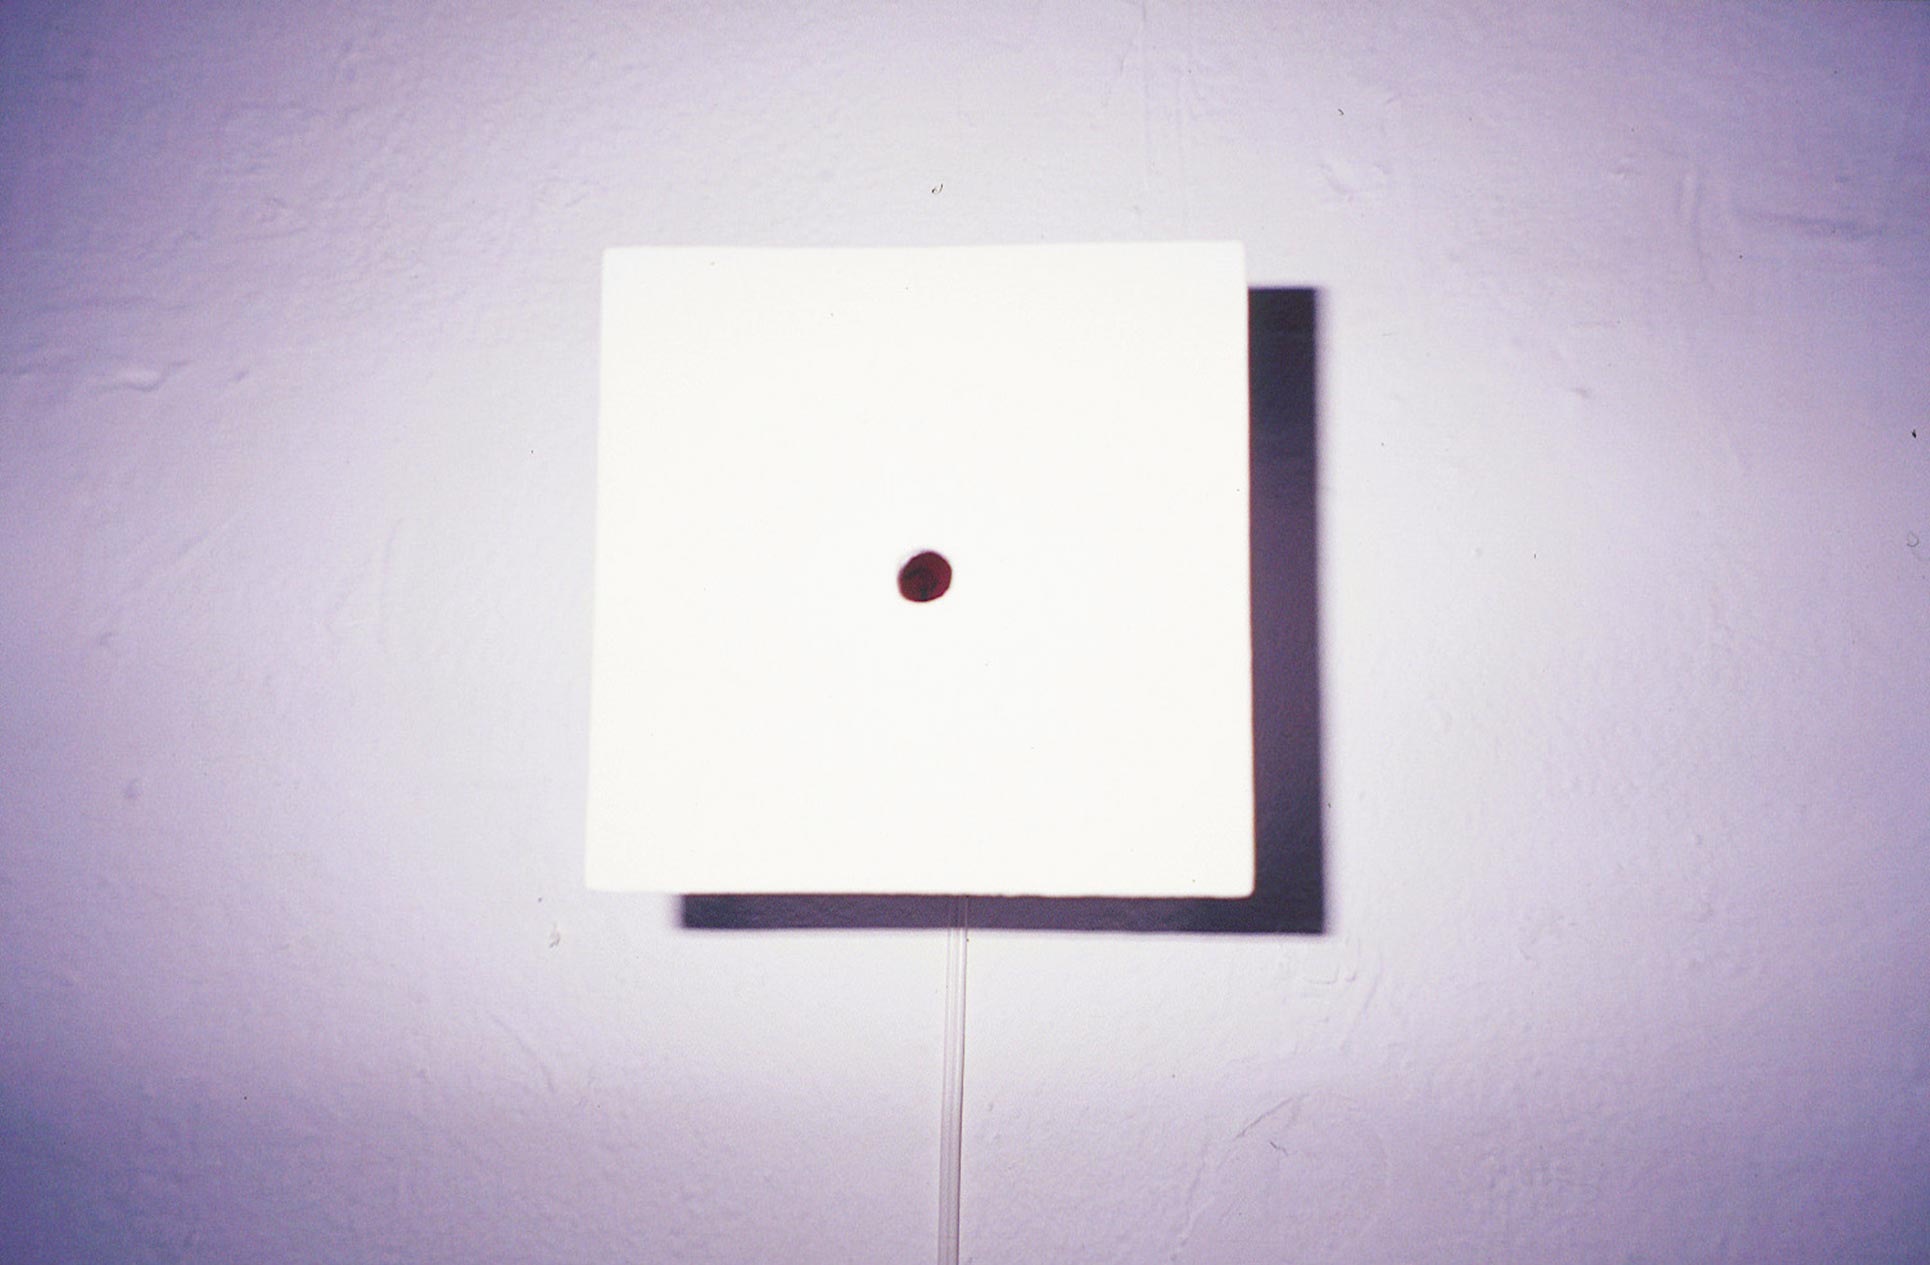 Detail of one light-box